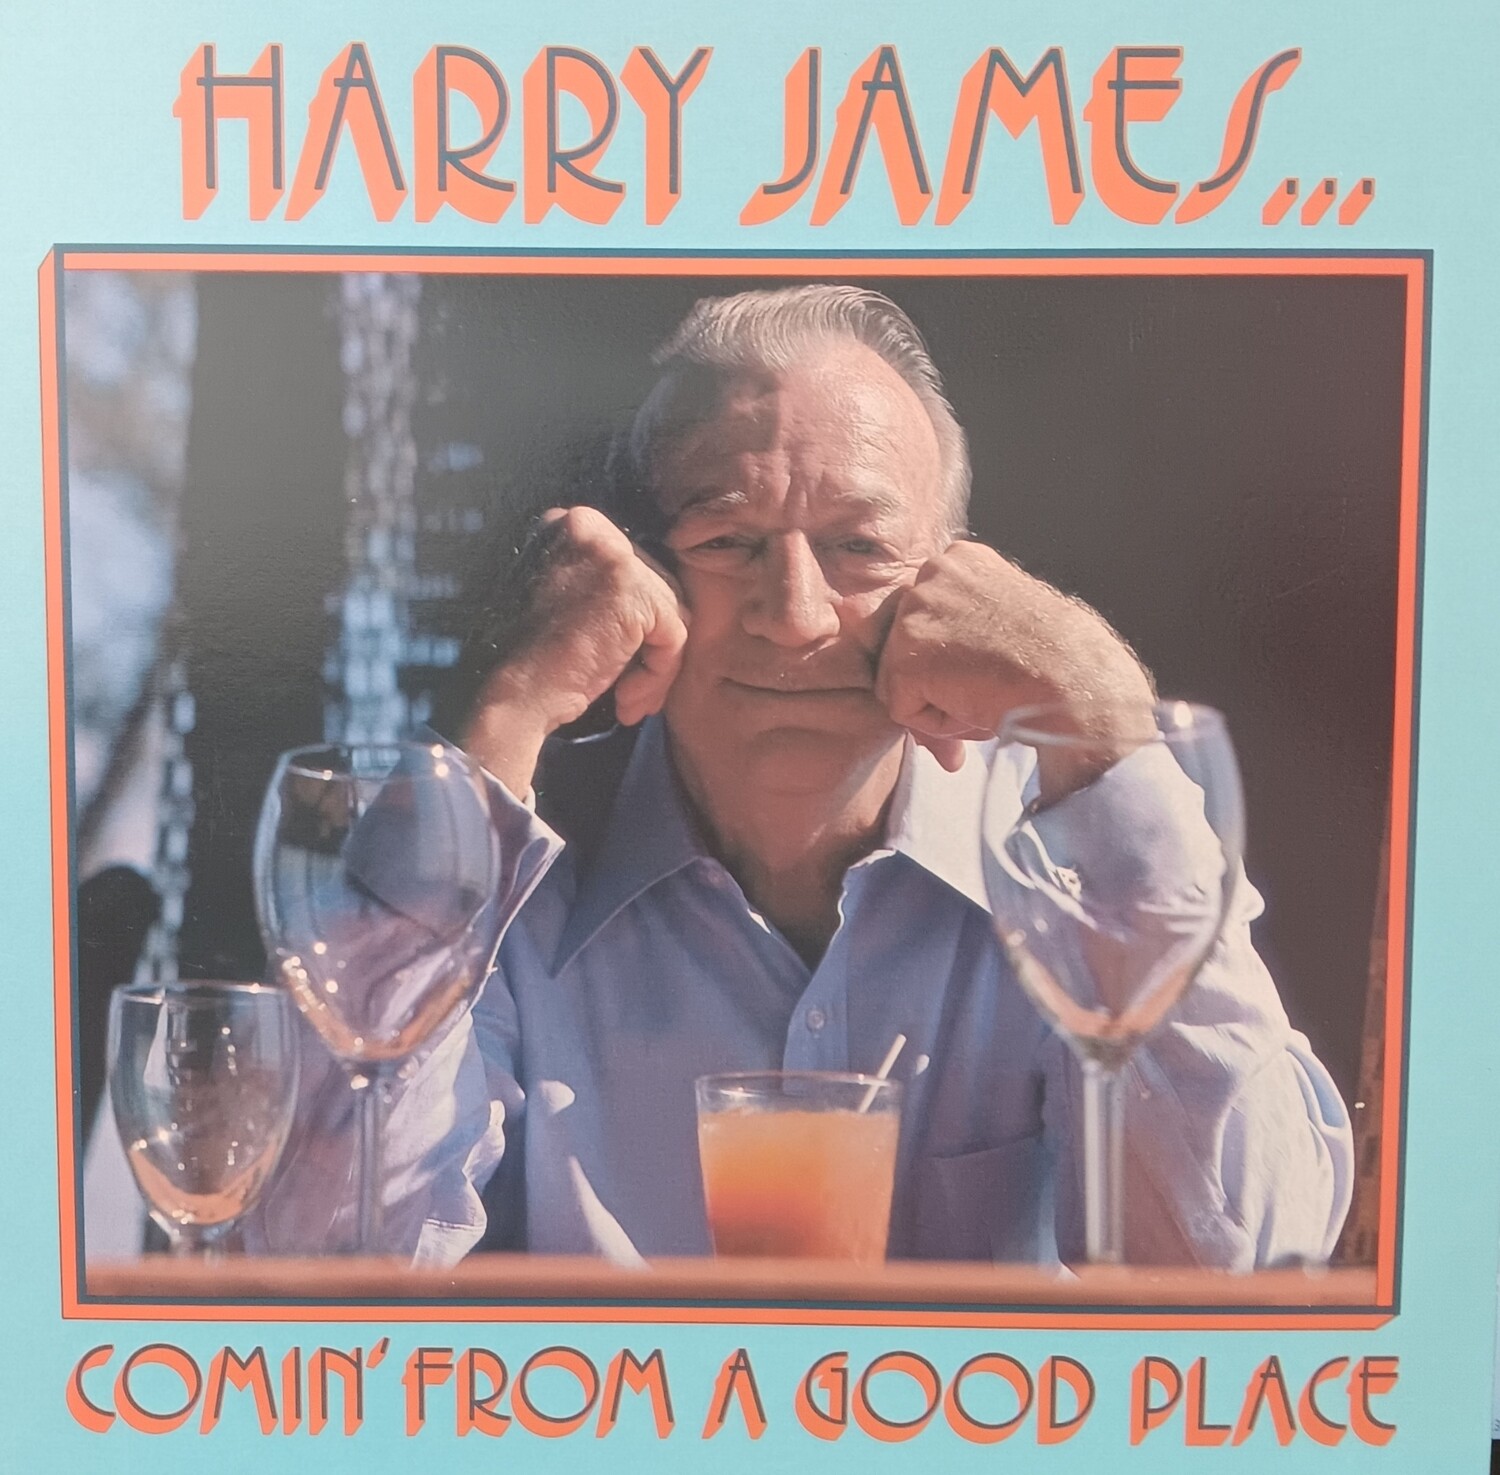 HARRY JAMES - Comin from a good place